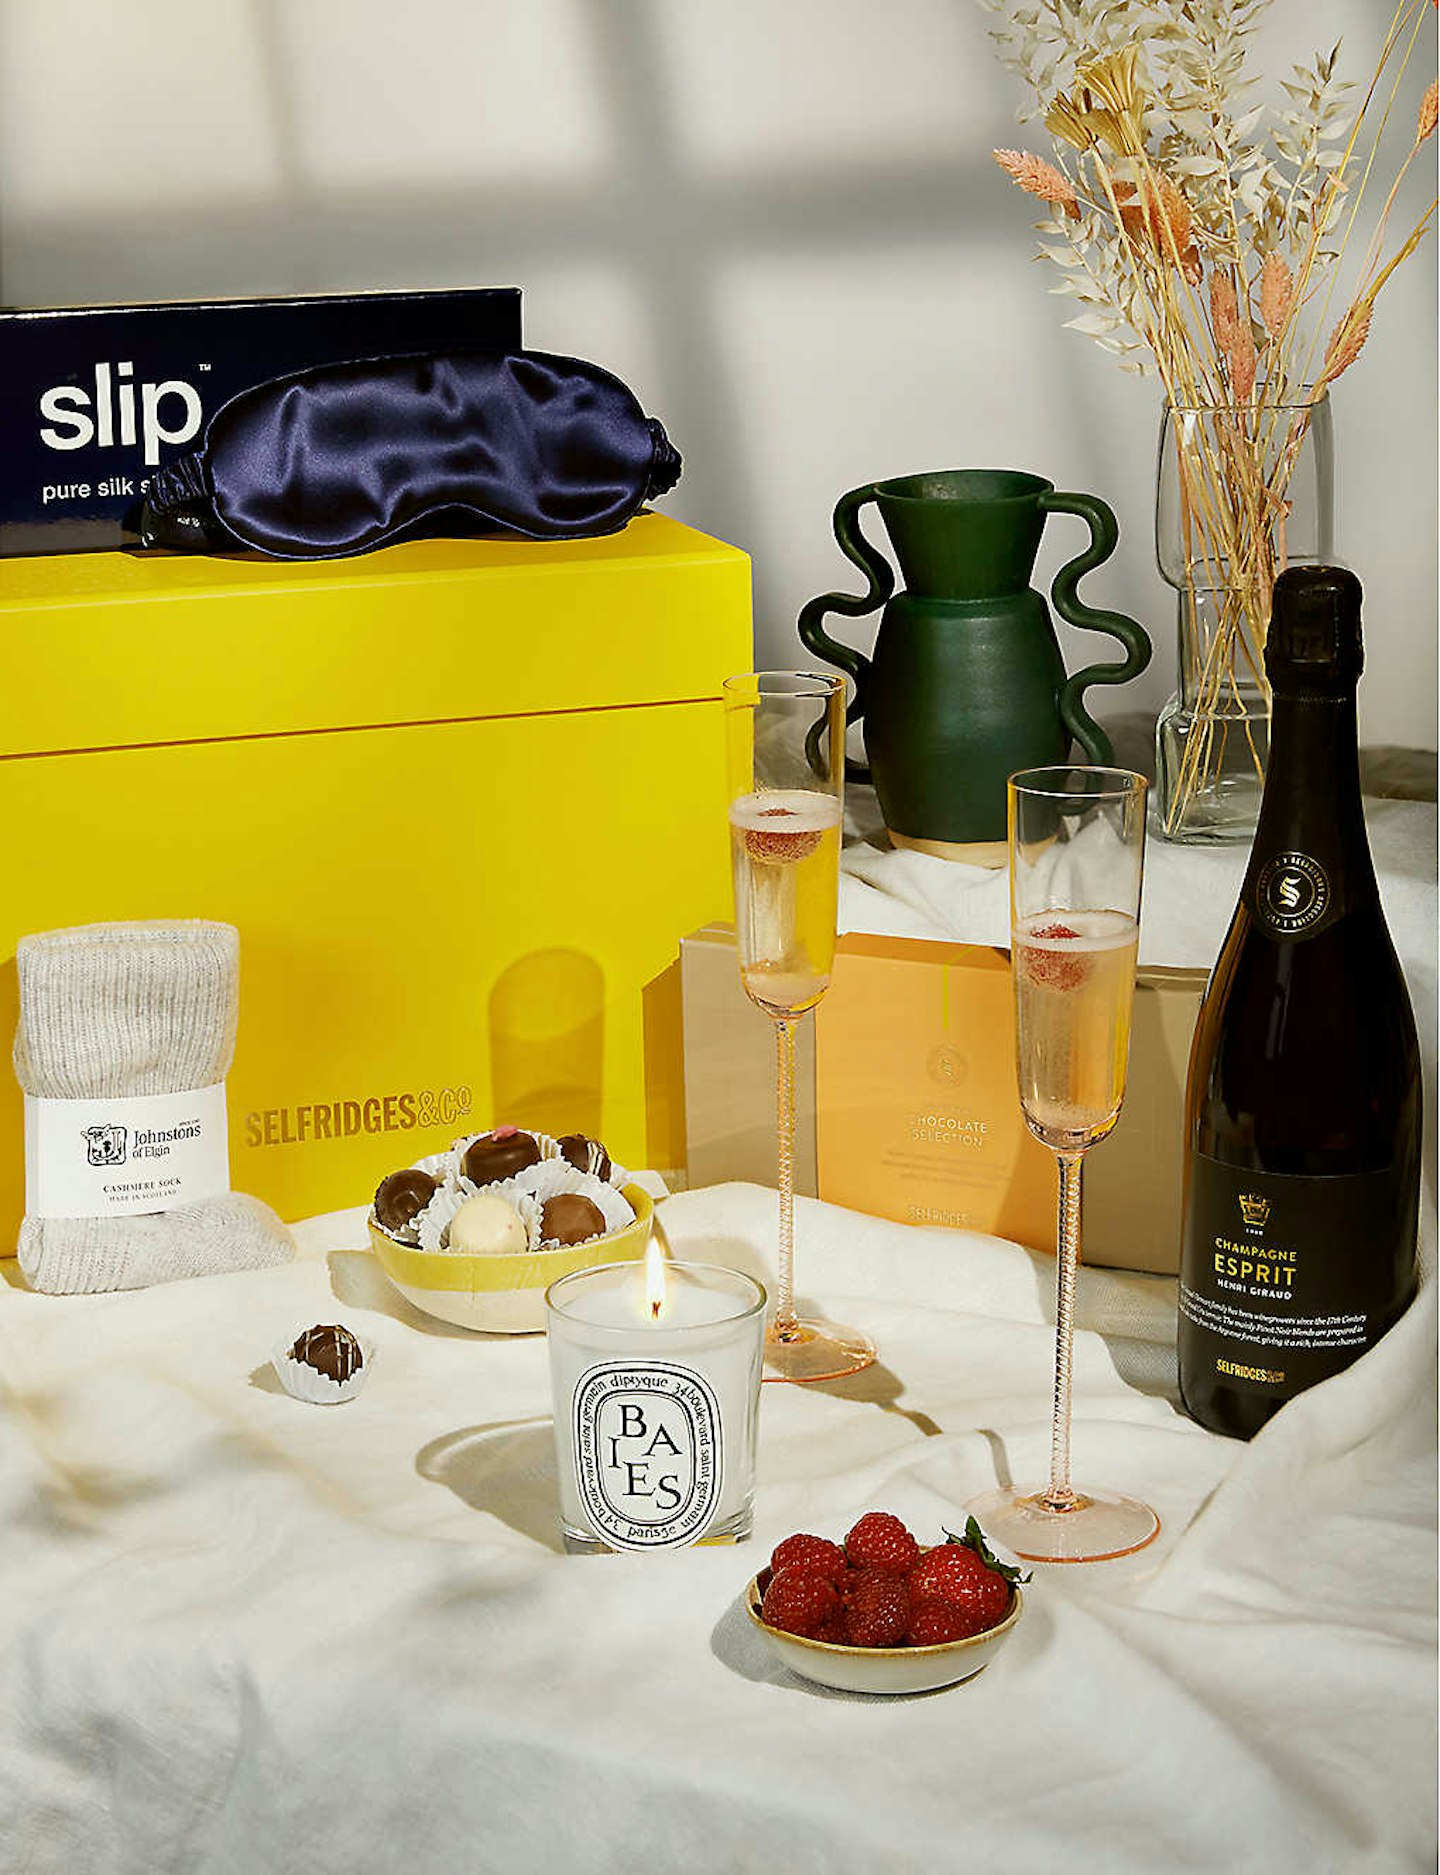 Selfridges, Pamper and Relax gift box, 185